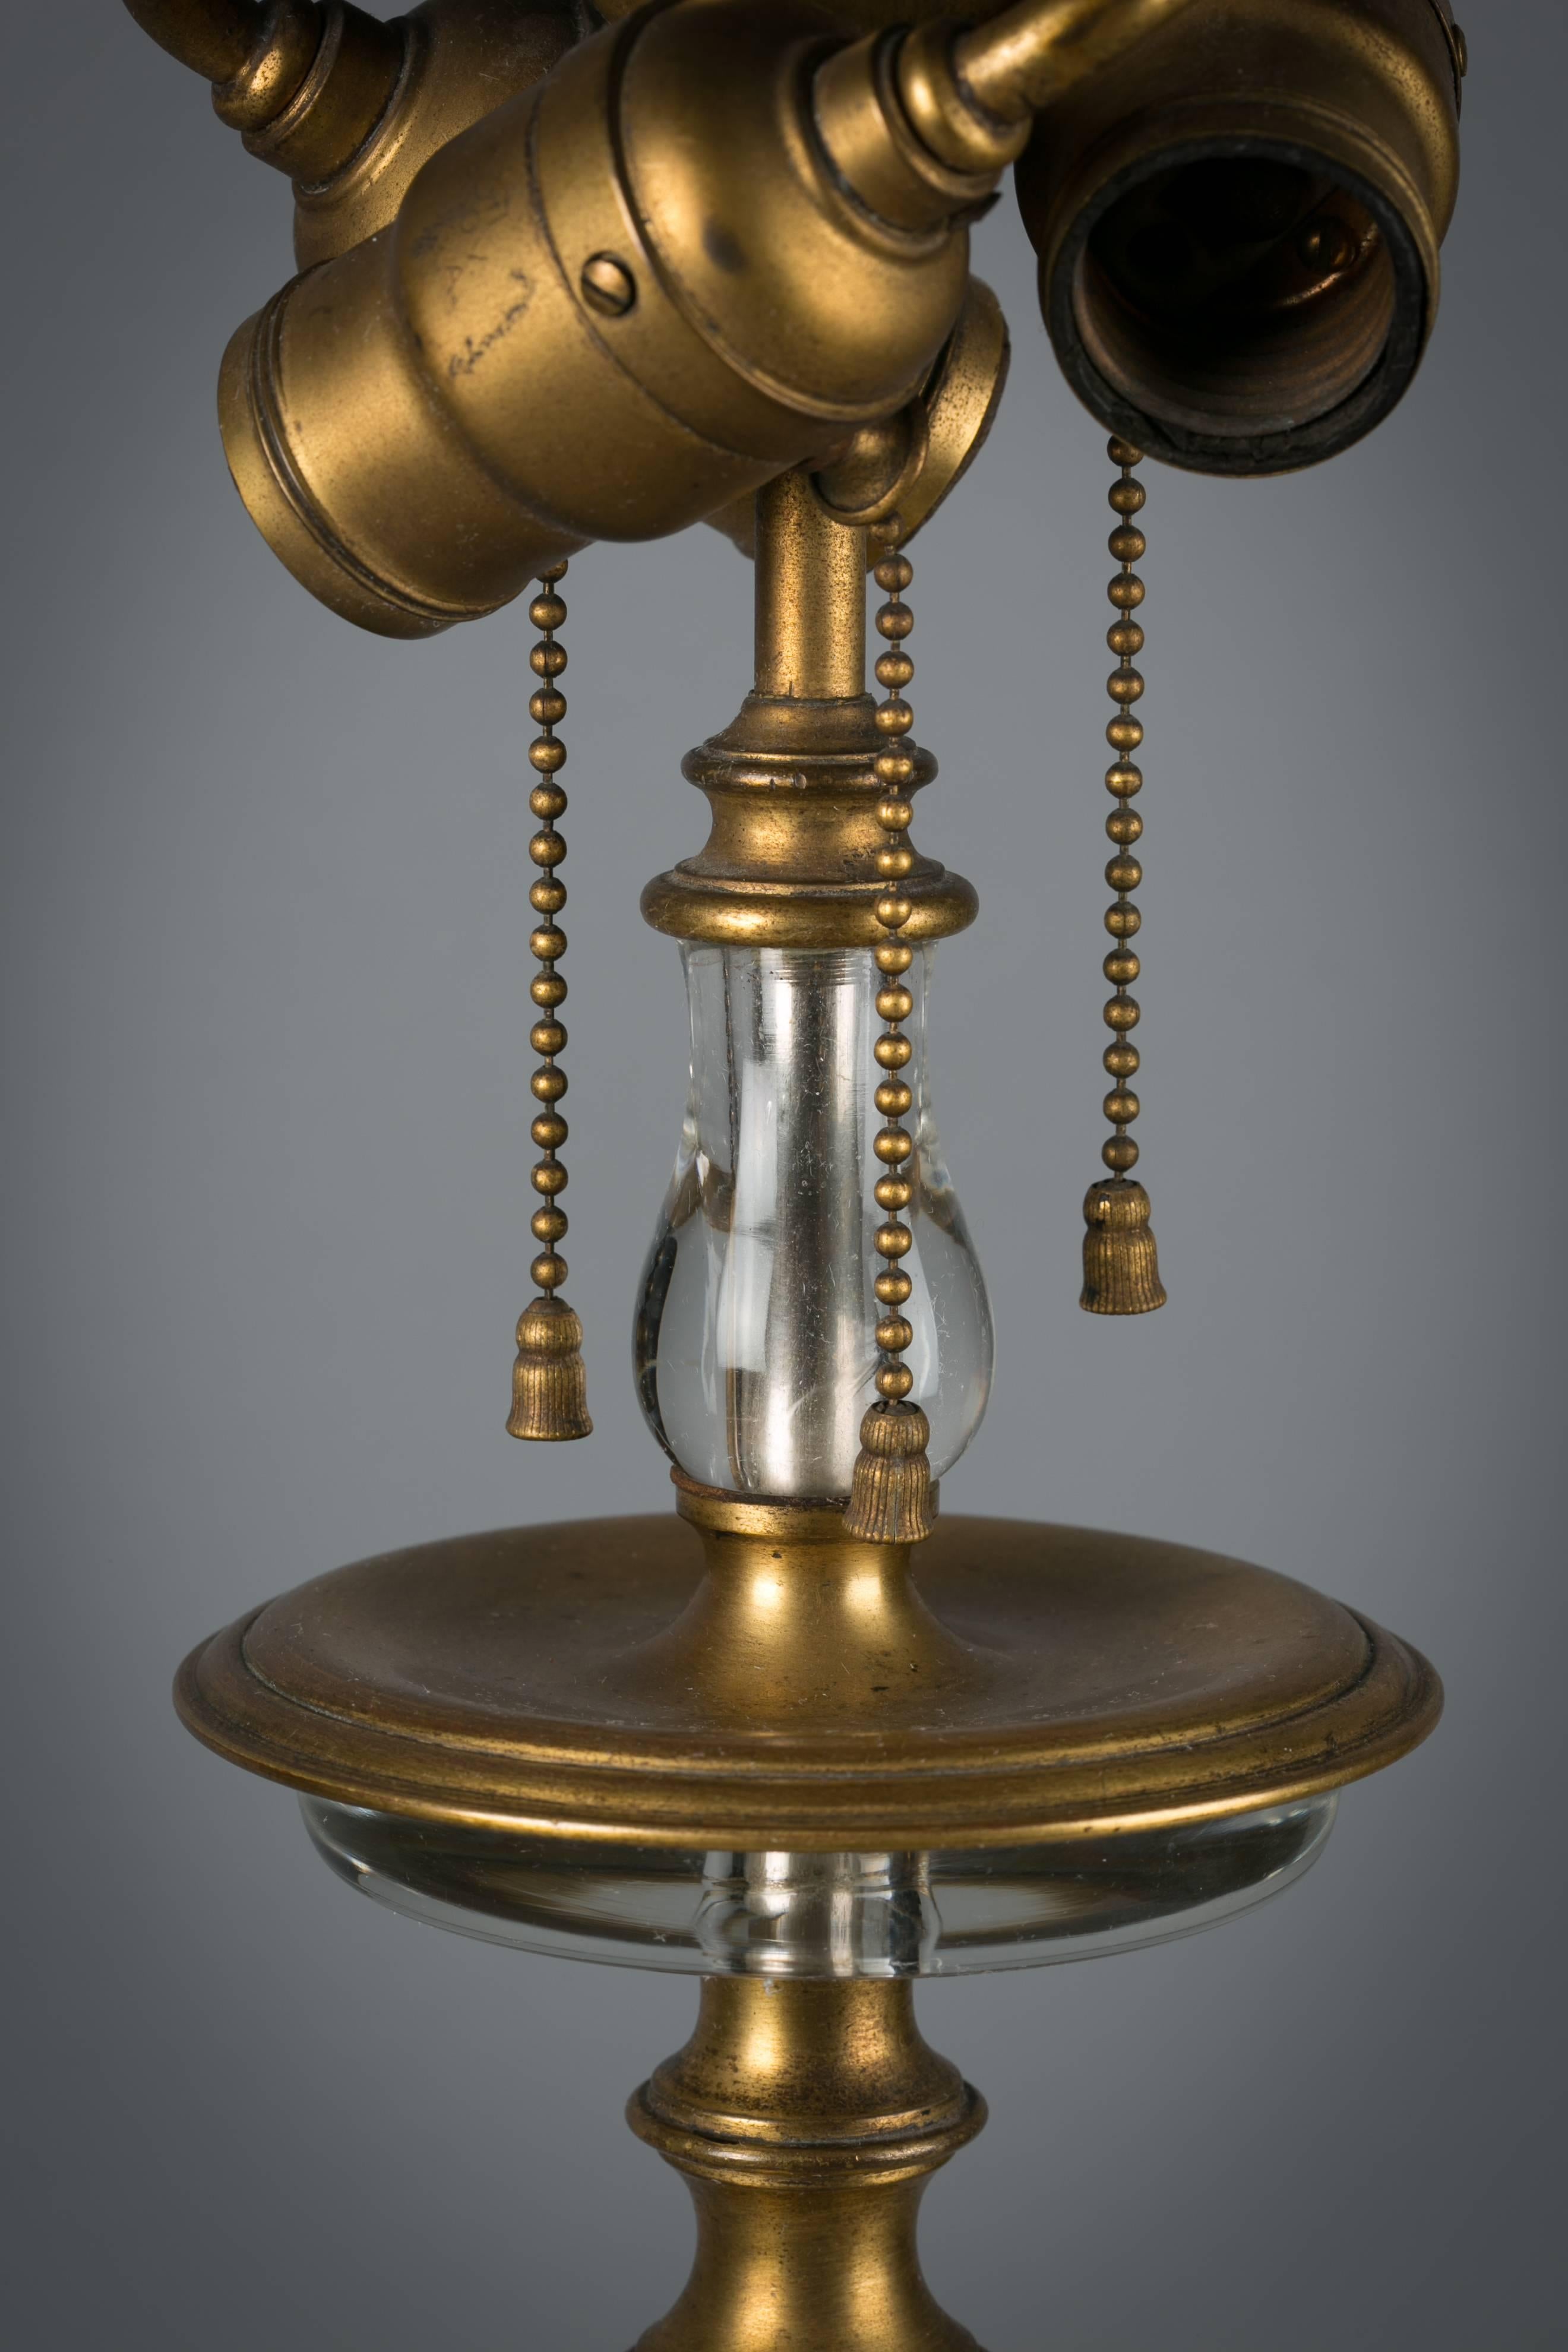 American bronze and rock crystal lamp, circa 1900. Made by E.F. Caldwell and Co.